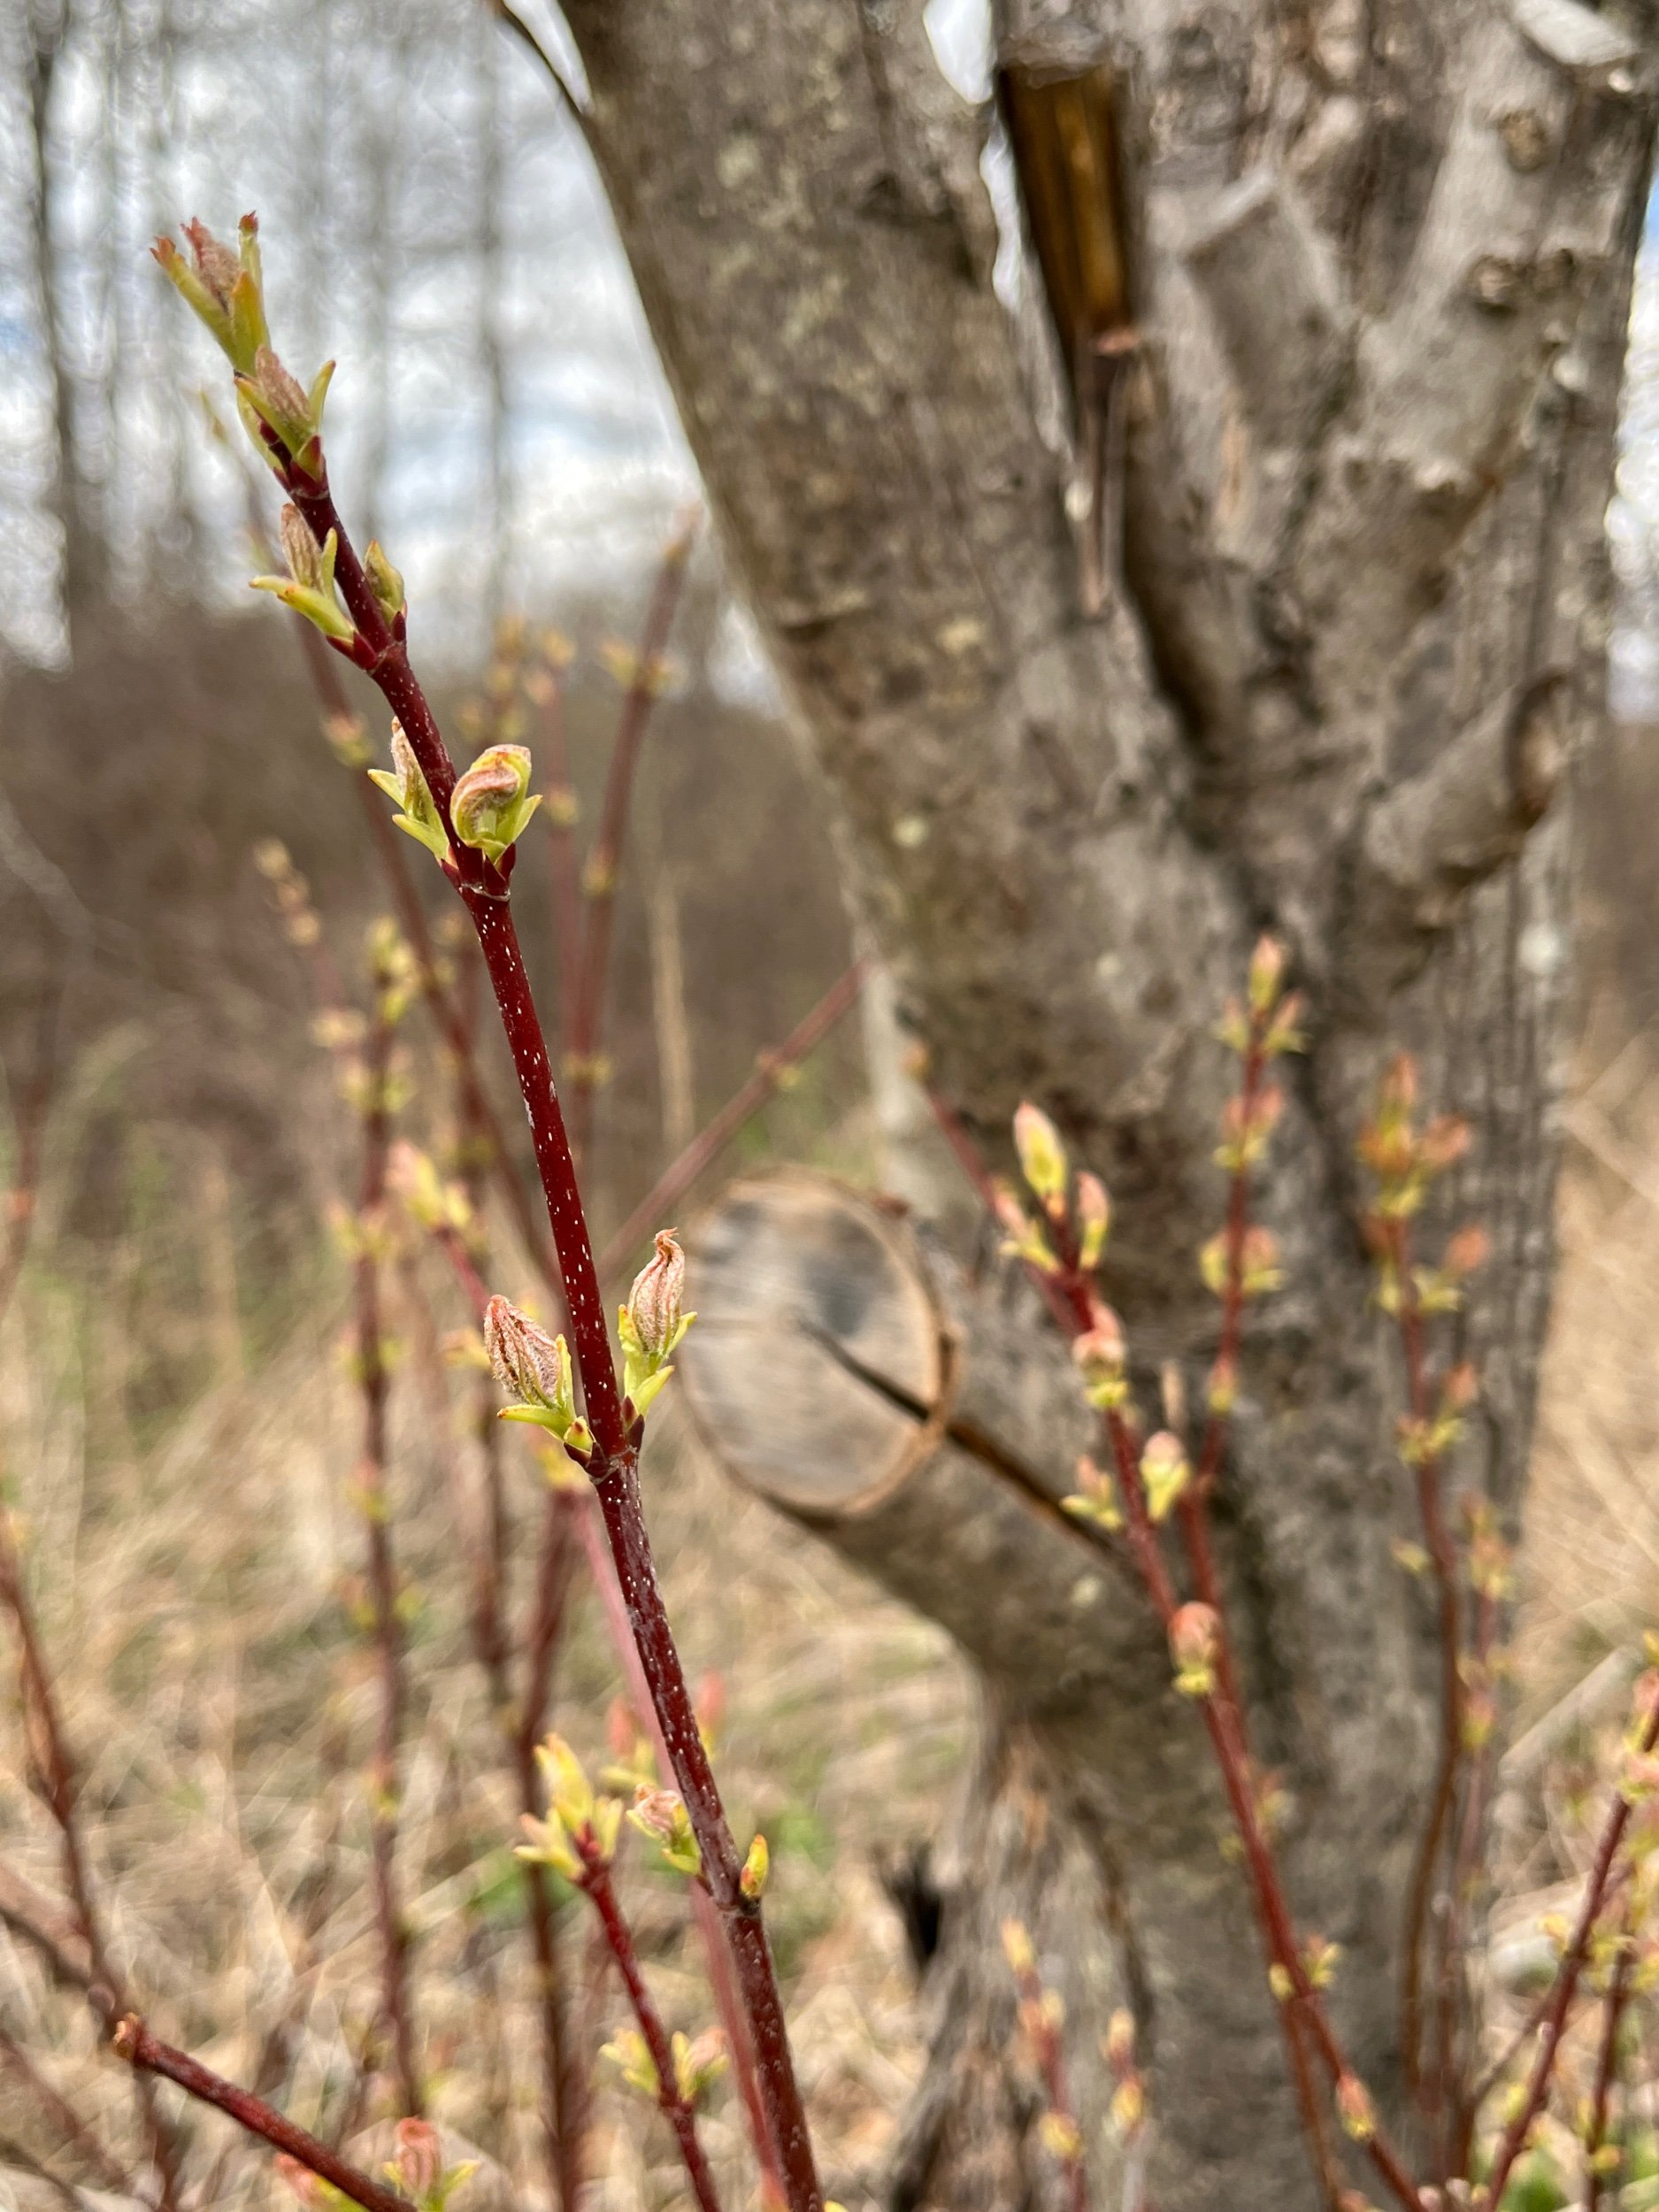  Maple buds. Spring foliage season is almost here! 